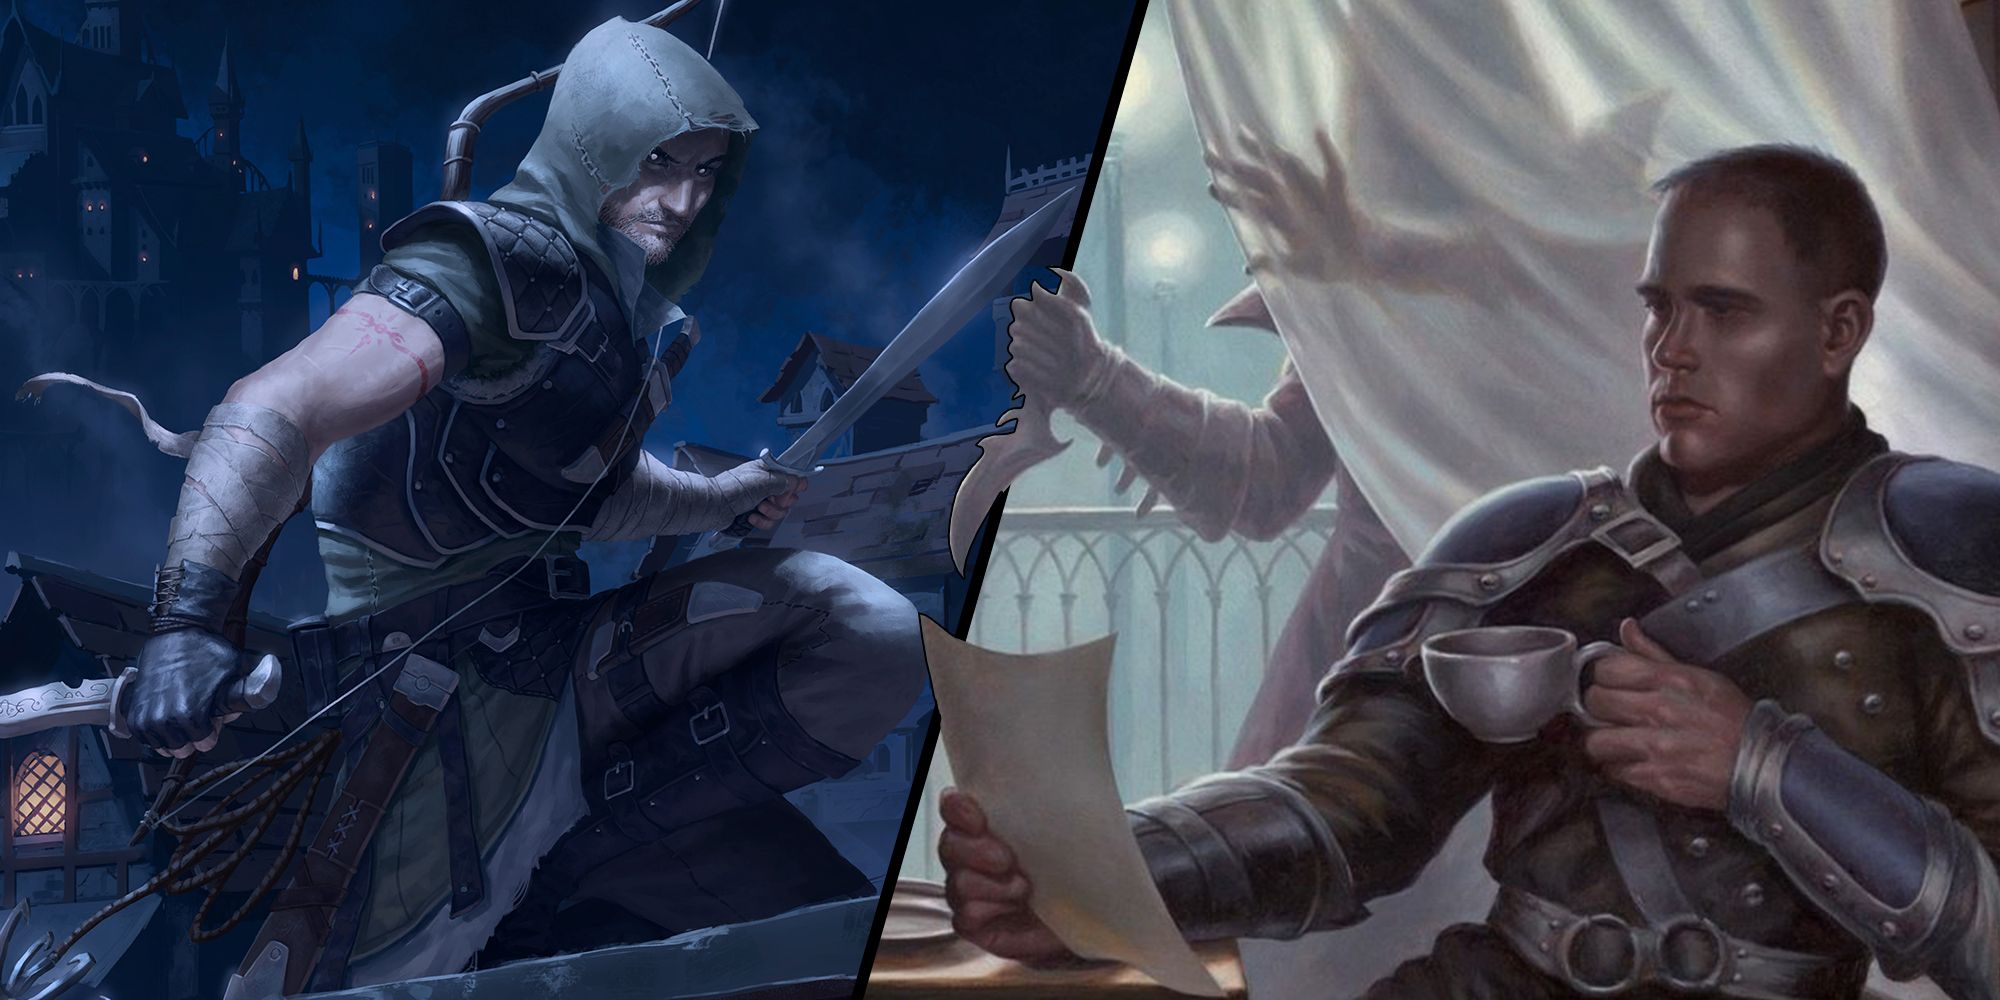 Dungeons & Dragons split image of a rogue on a rooftop and an assassin sneaking behind a guard